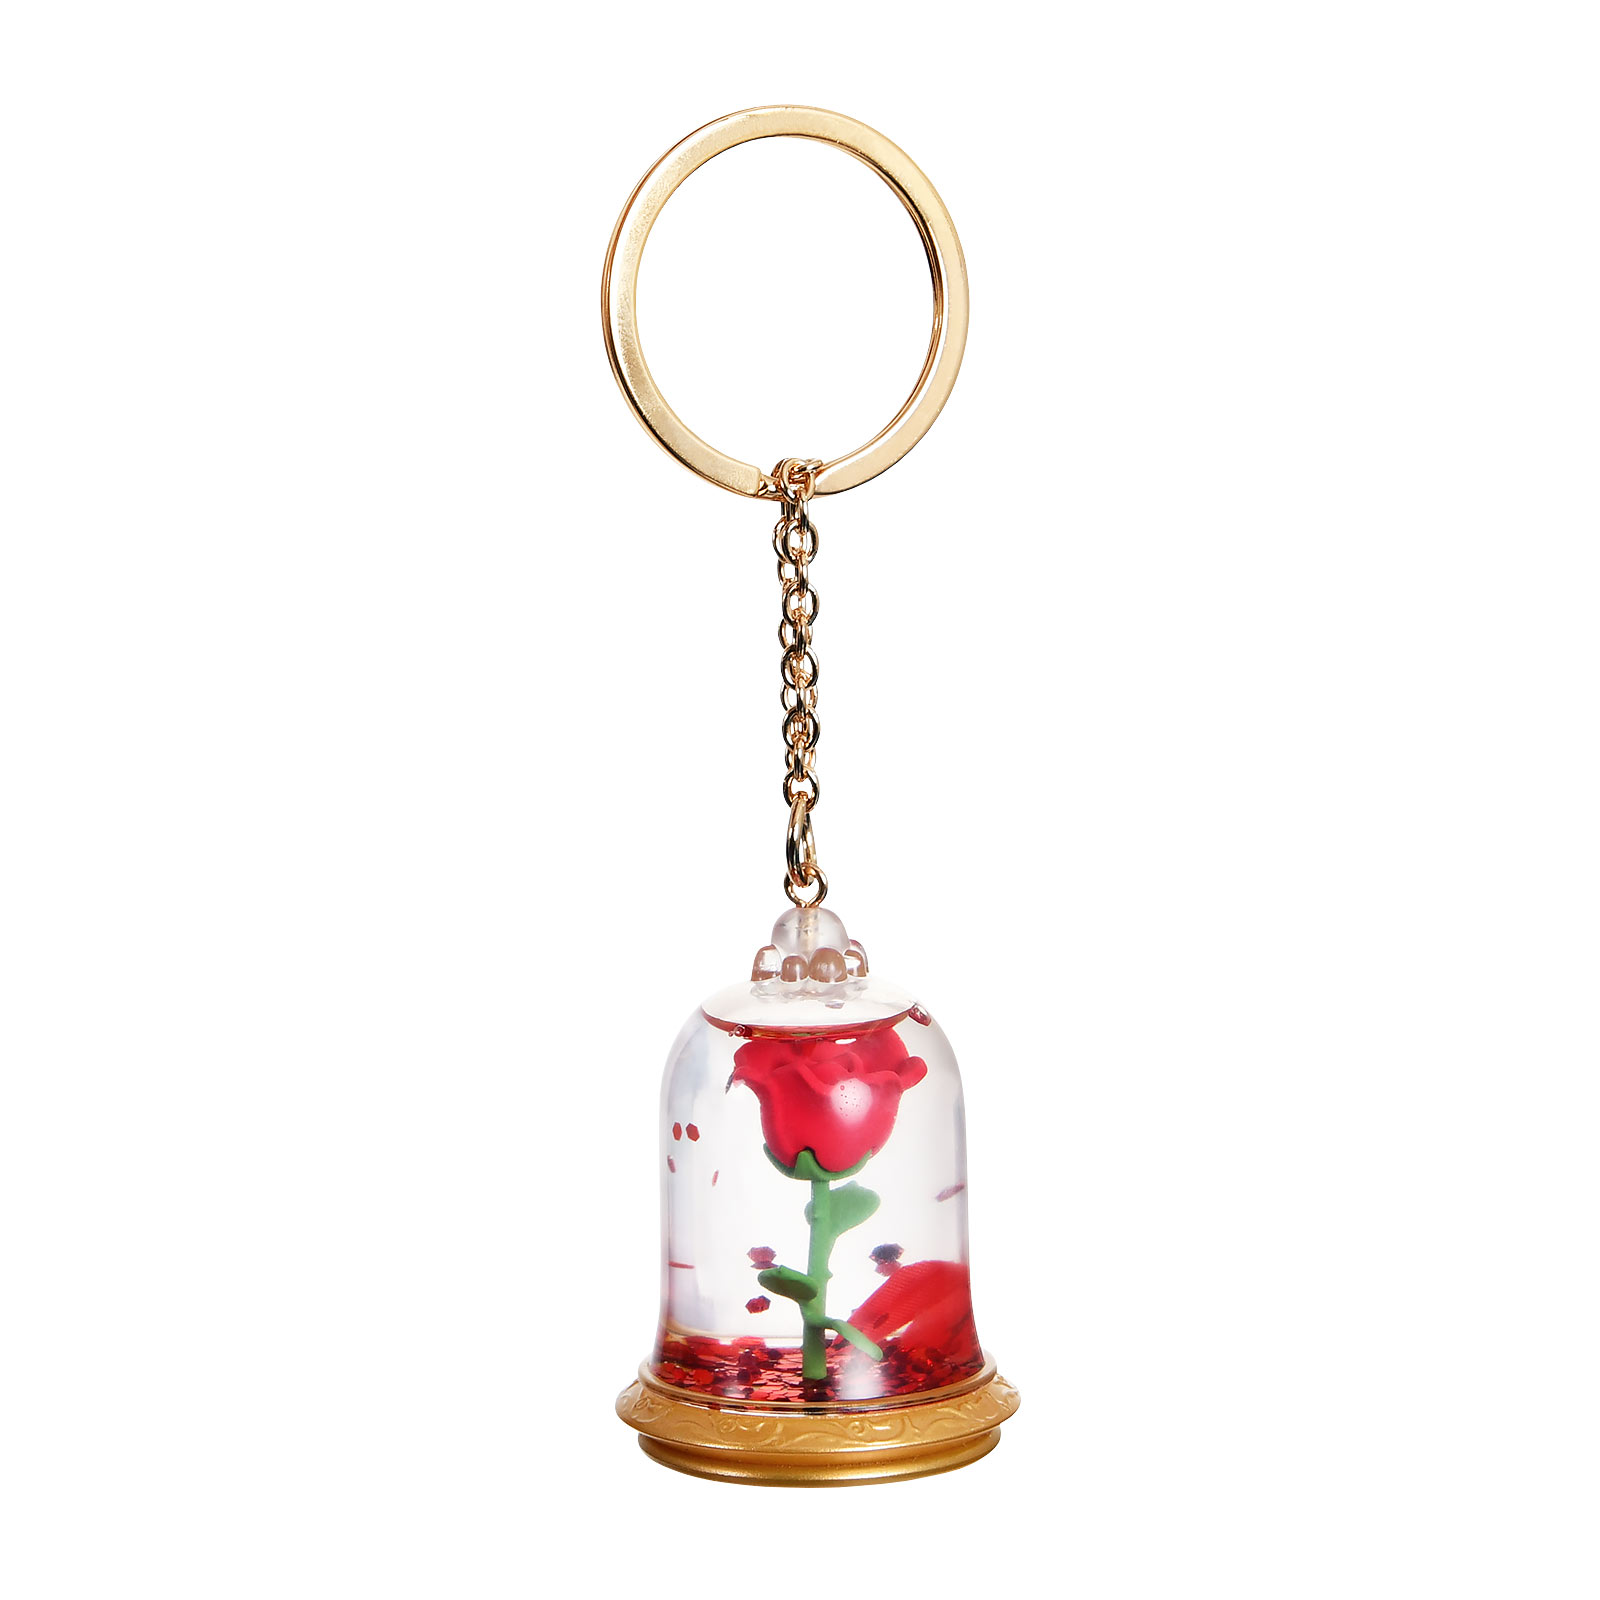 Beauty and the Beast - Enchanted Rose Keychain